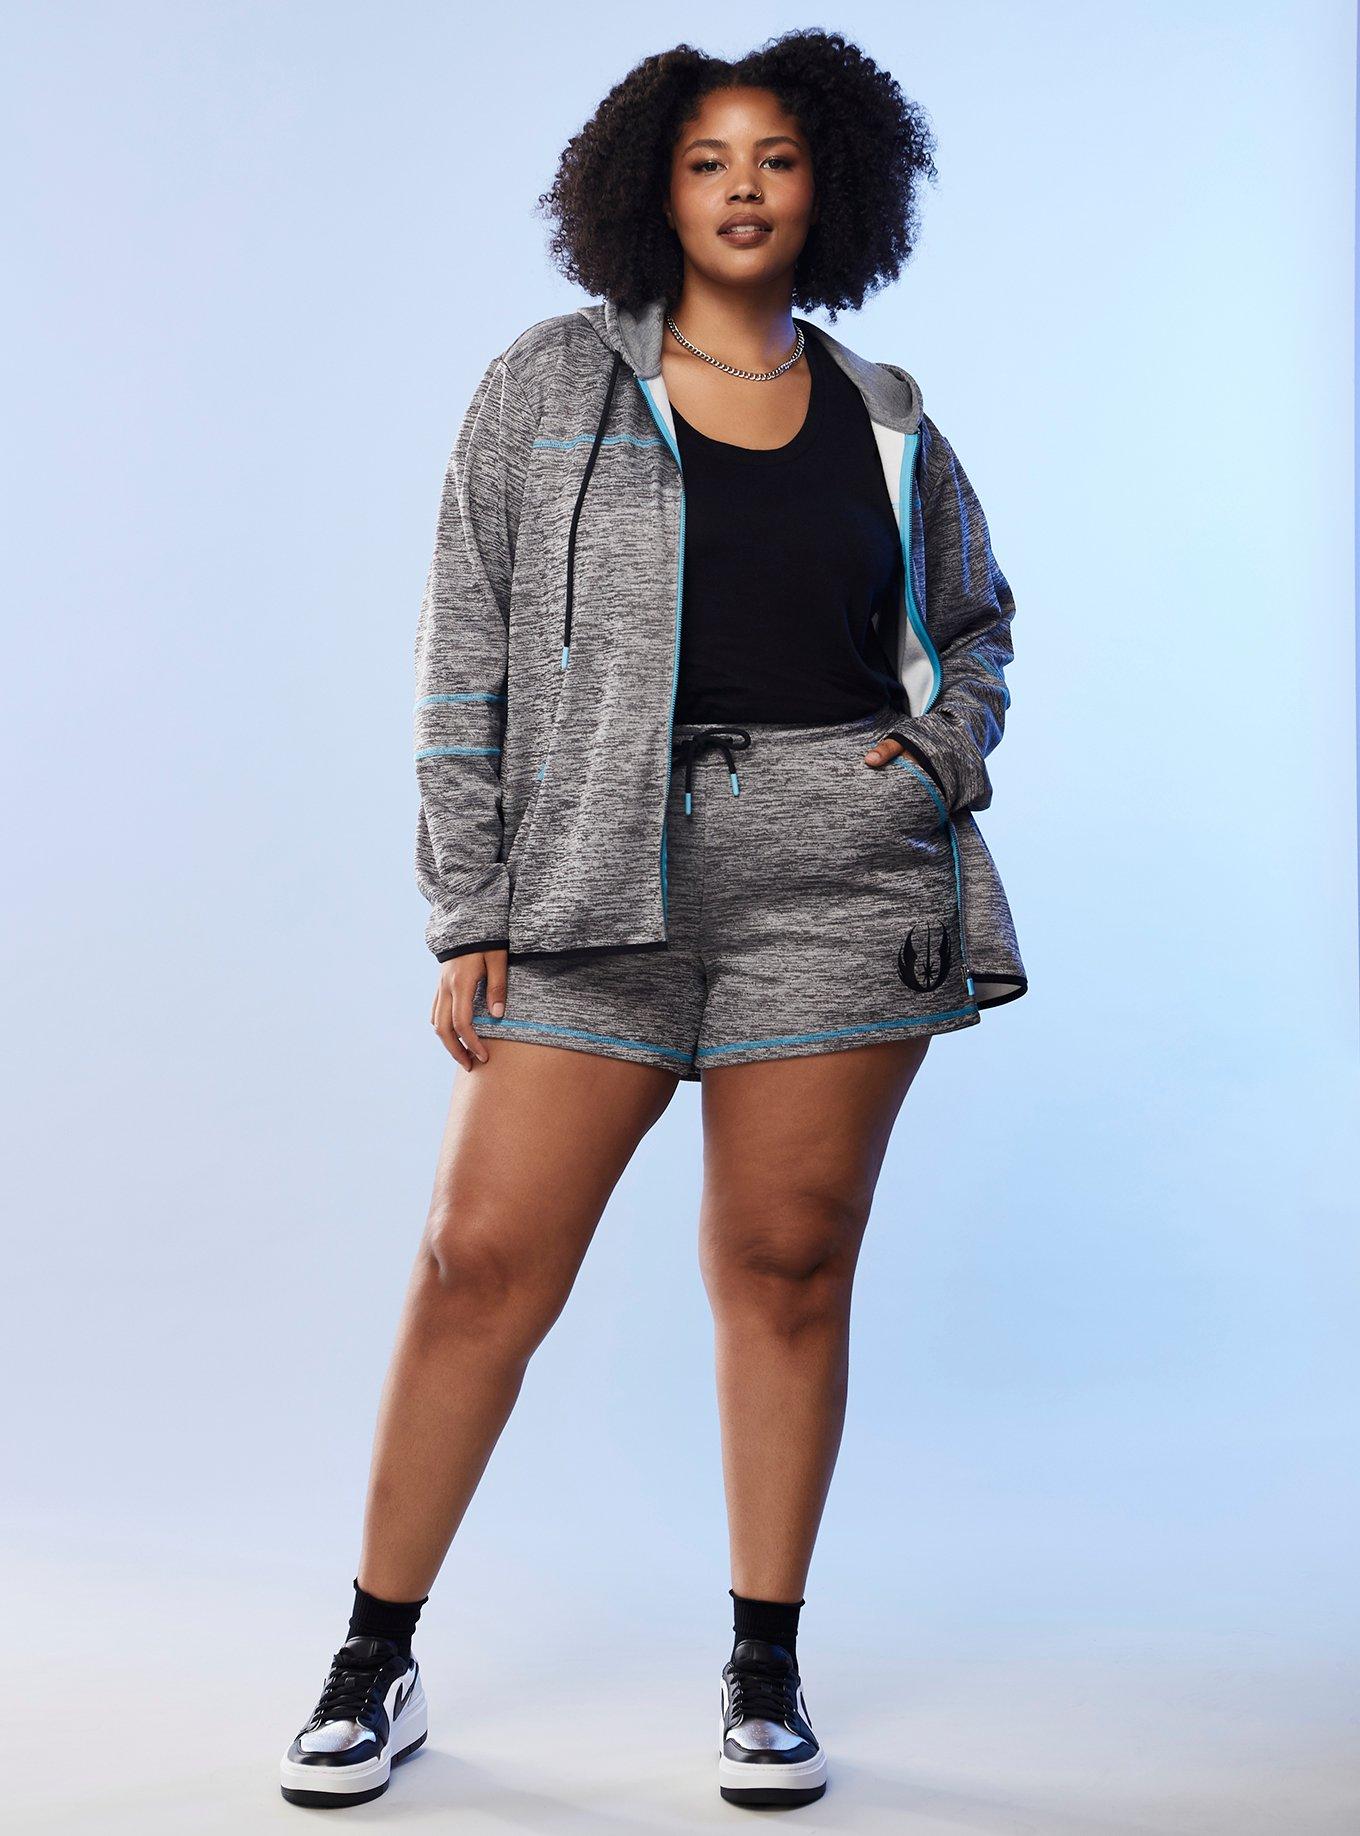 Her Universe Star Wars Jedi Order Athletic Shorts Plus Size Her Universe Exclusive, , hi-res